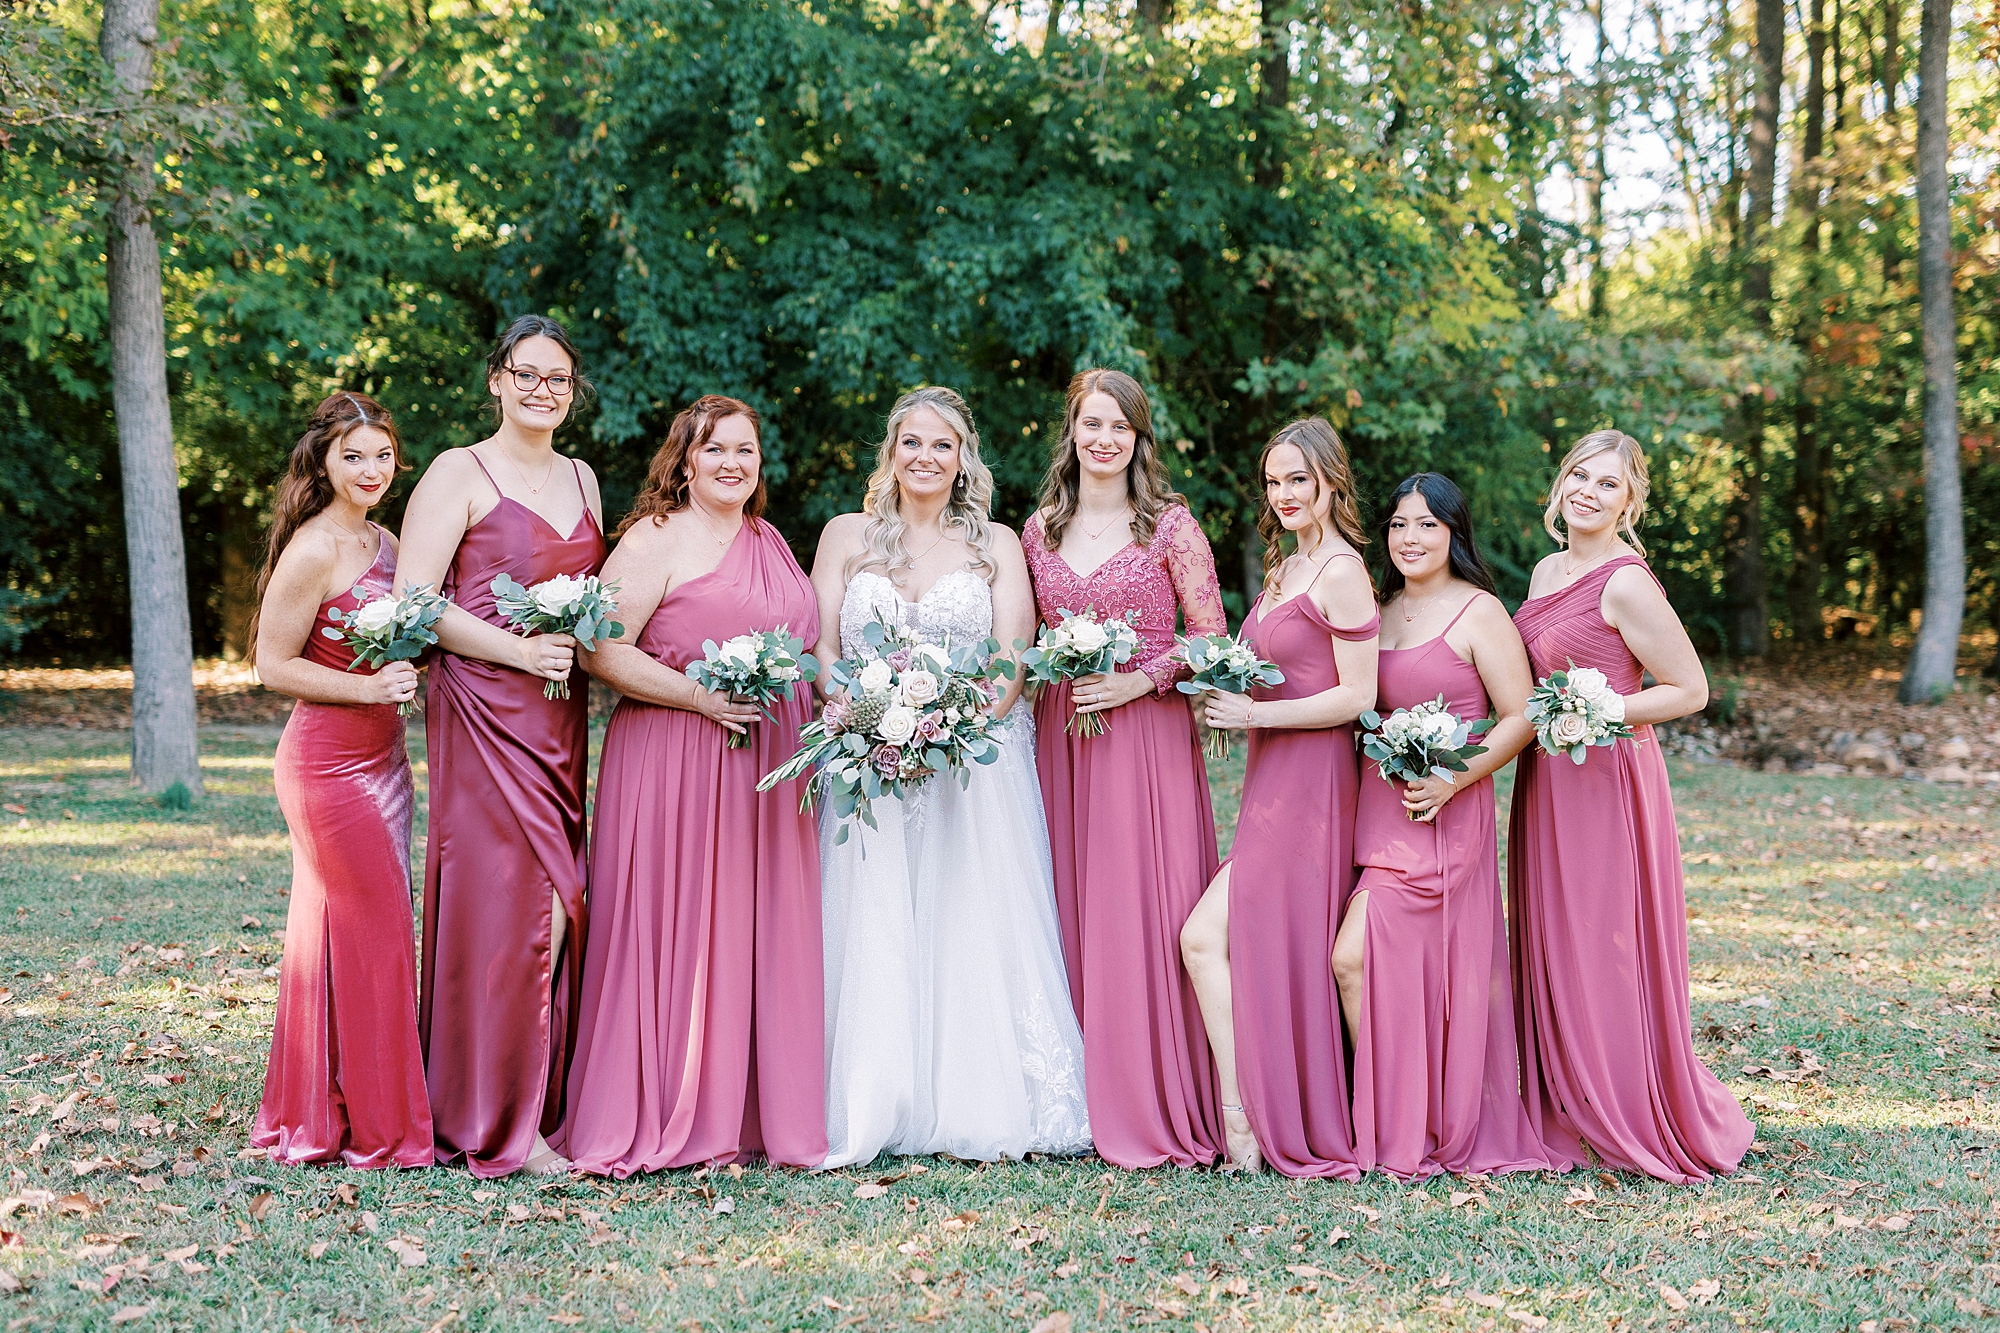 bride stands with bridesmaids in dusty pink gowns